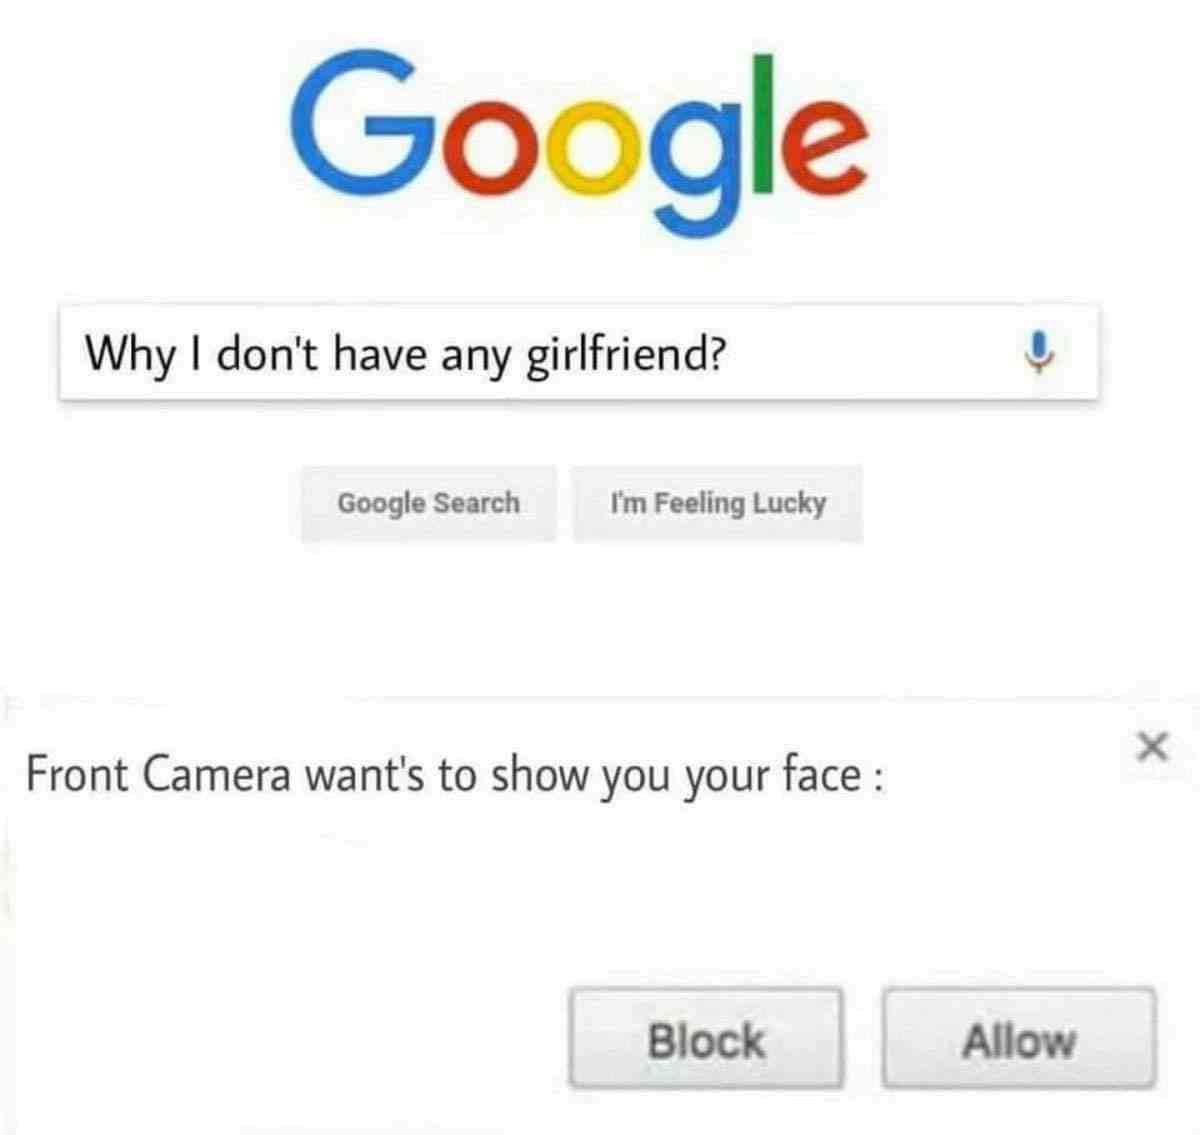 Why i don't have any girlfriend?